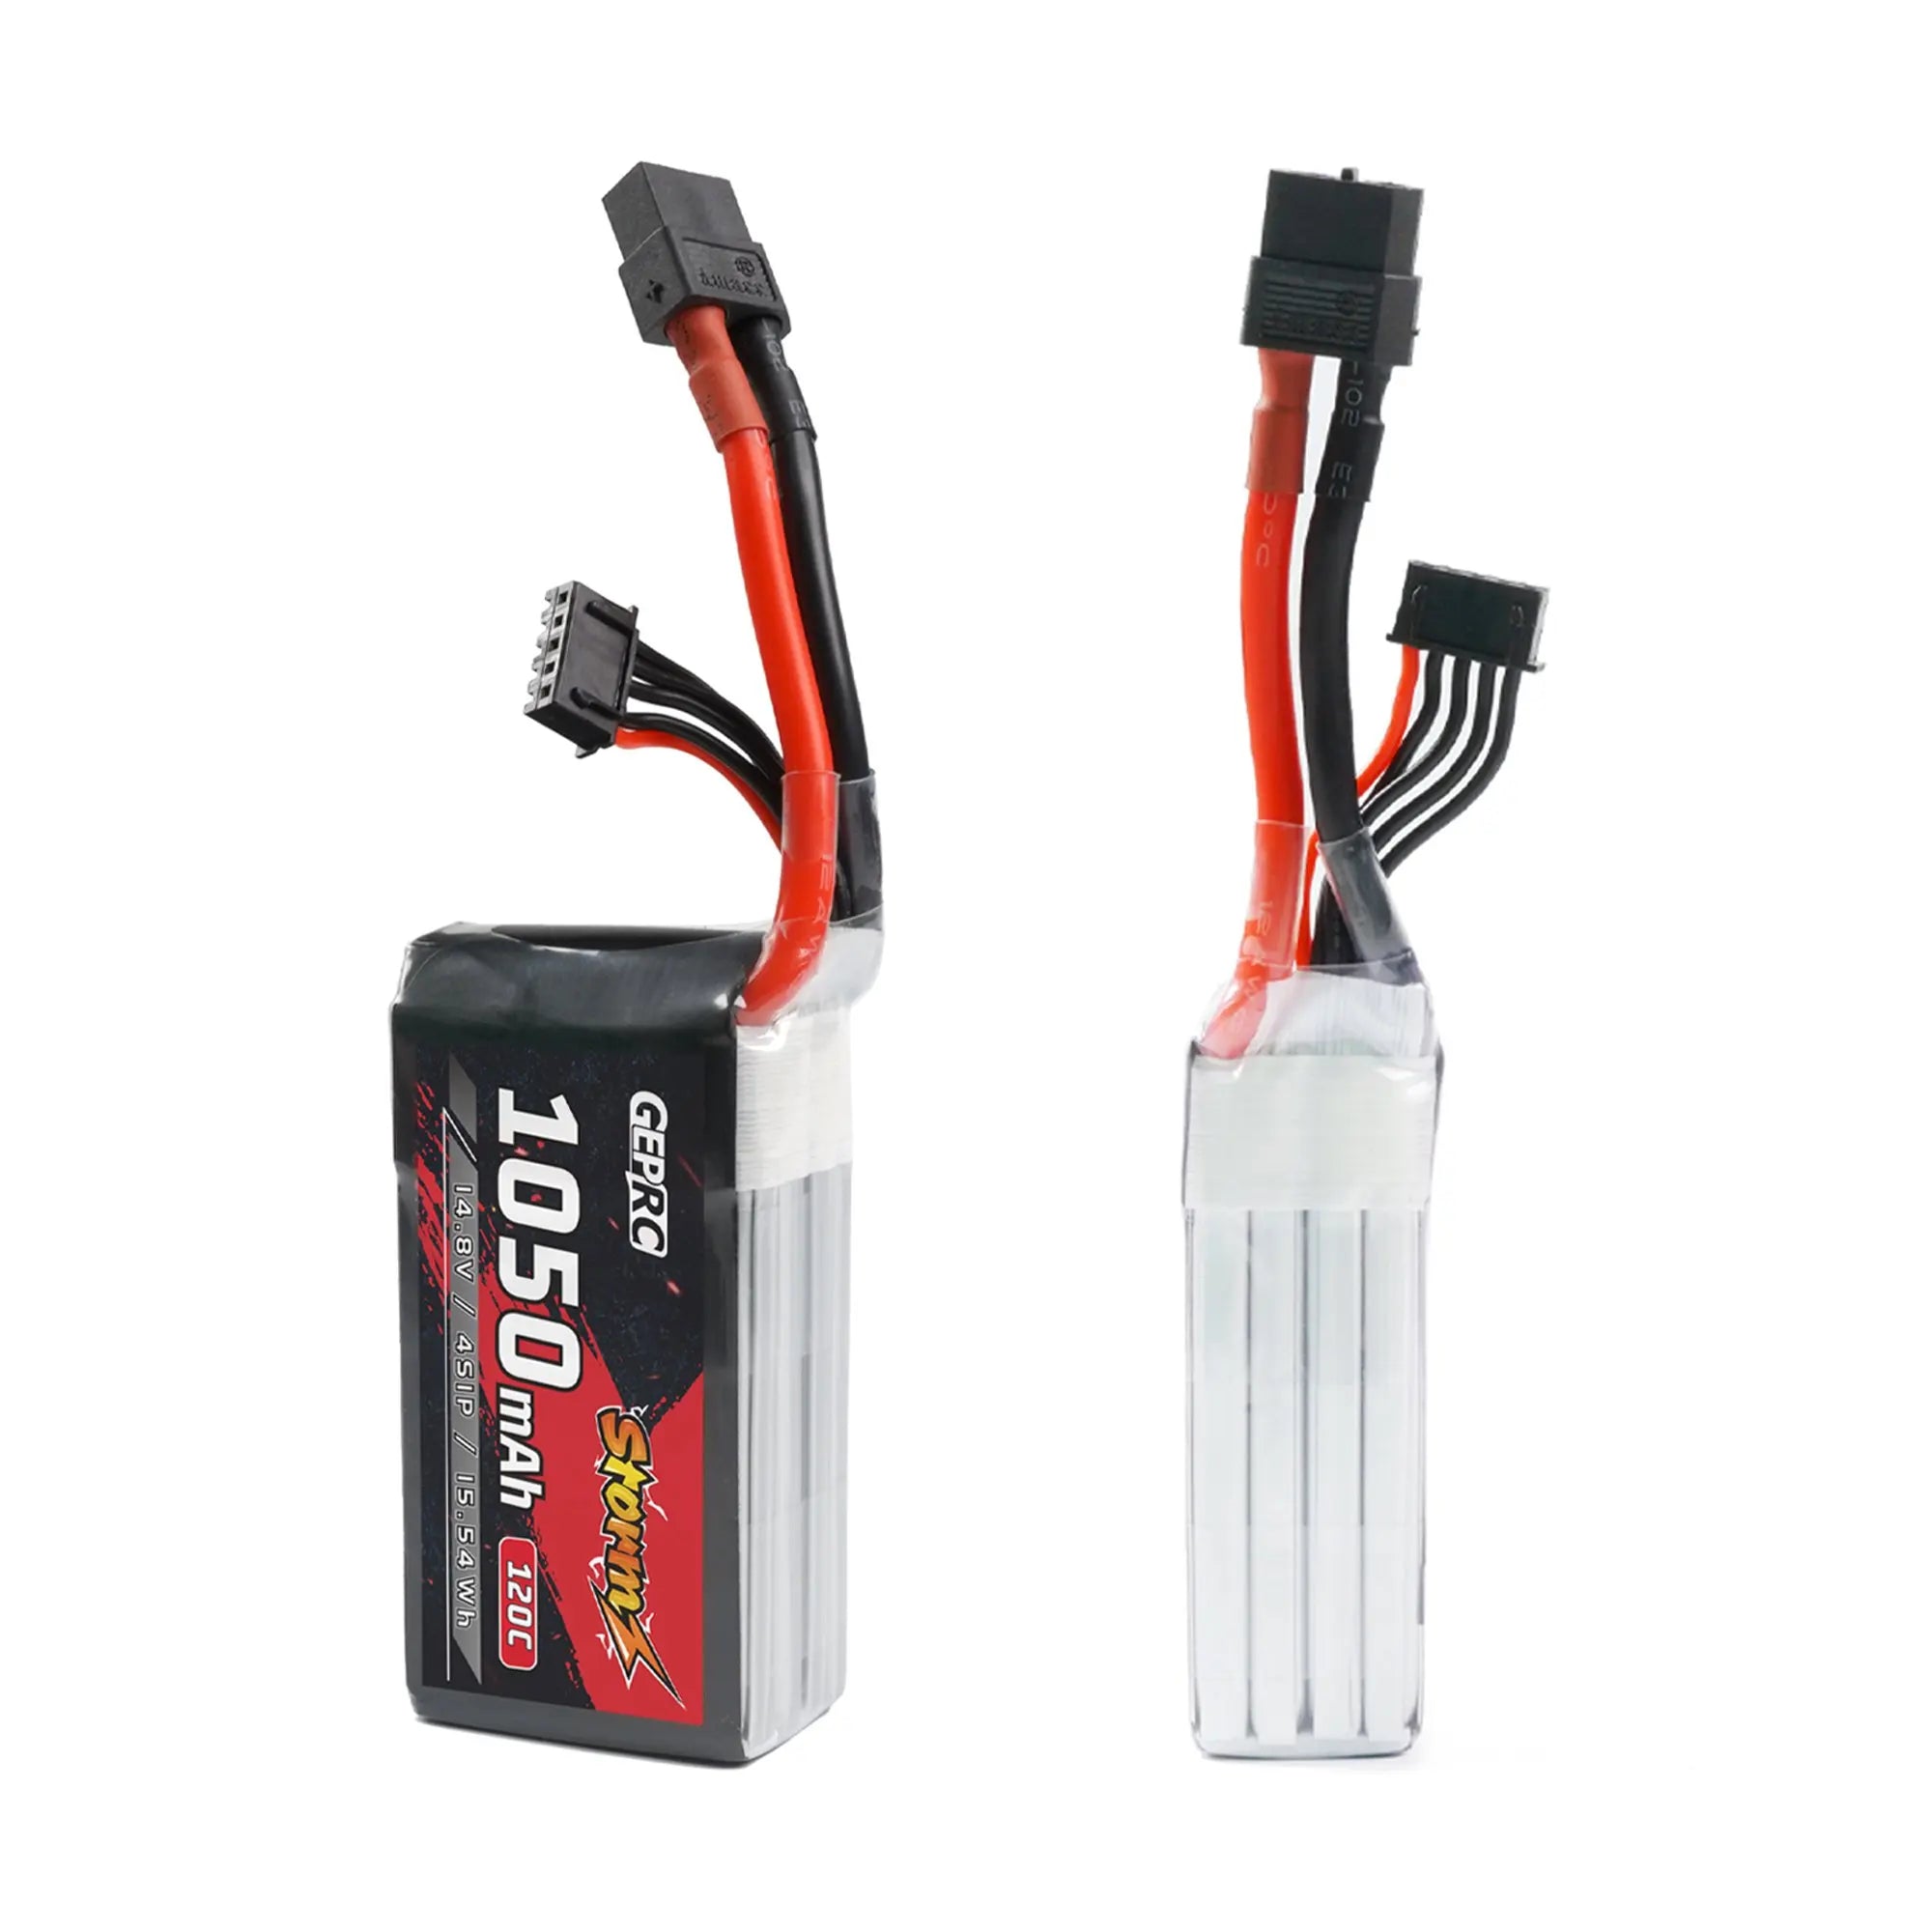 GEPRC Storm 4S 1050mAh 120C Lipo FV Battery, Please don't charge the battery unattended